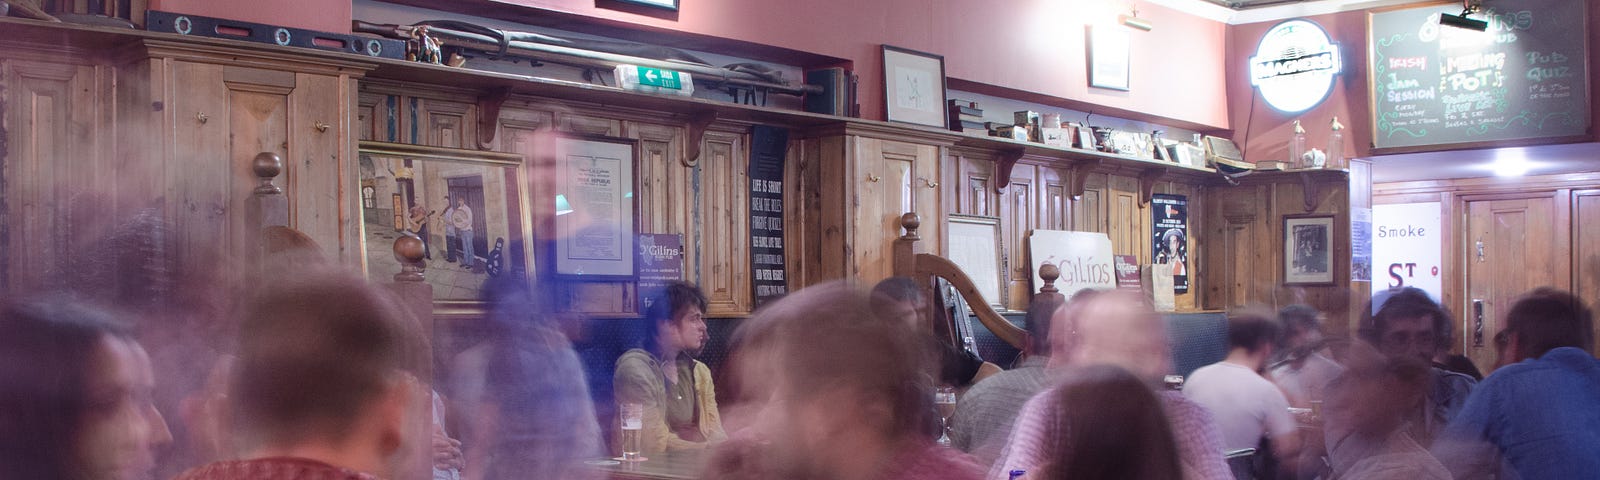 A slightly blurred picture showing a crowd of people seated in a pub.